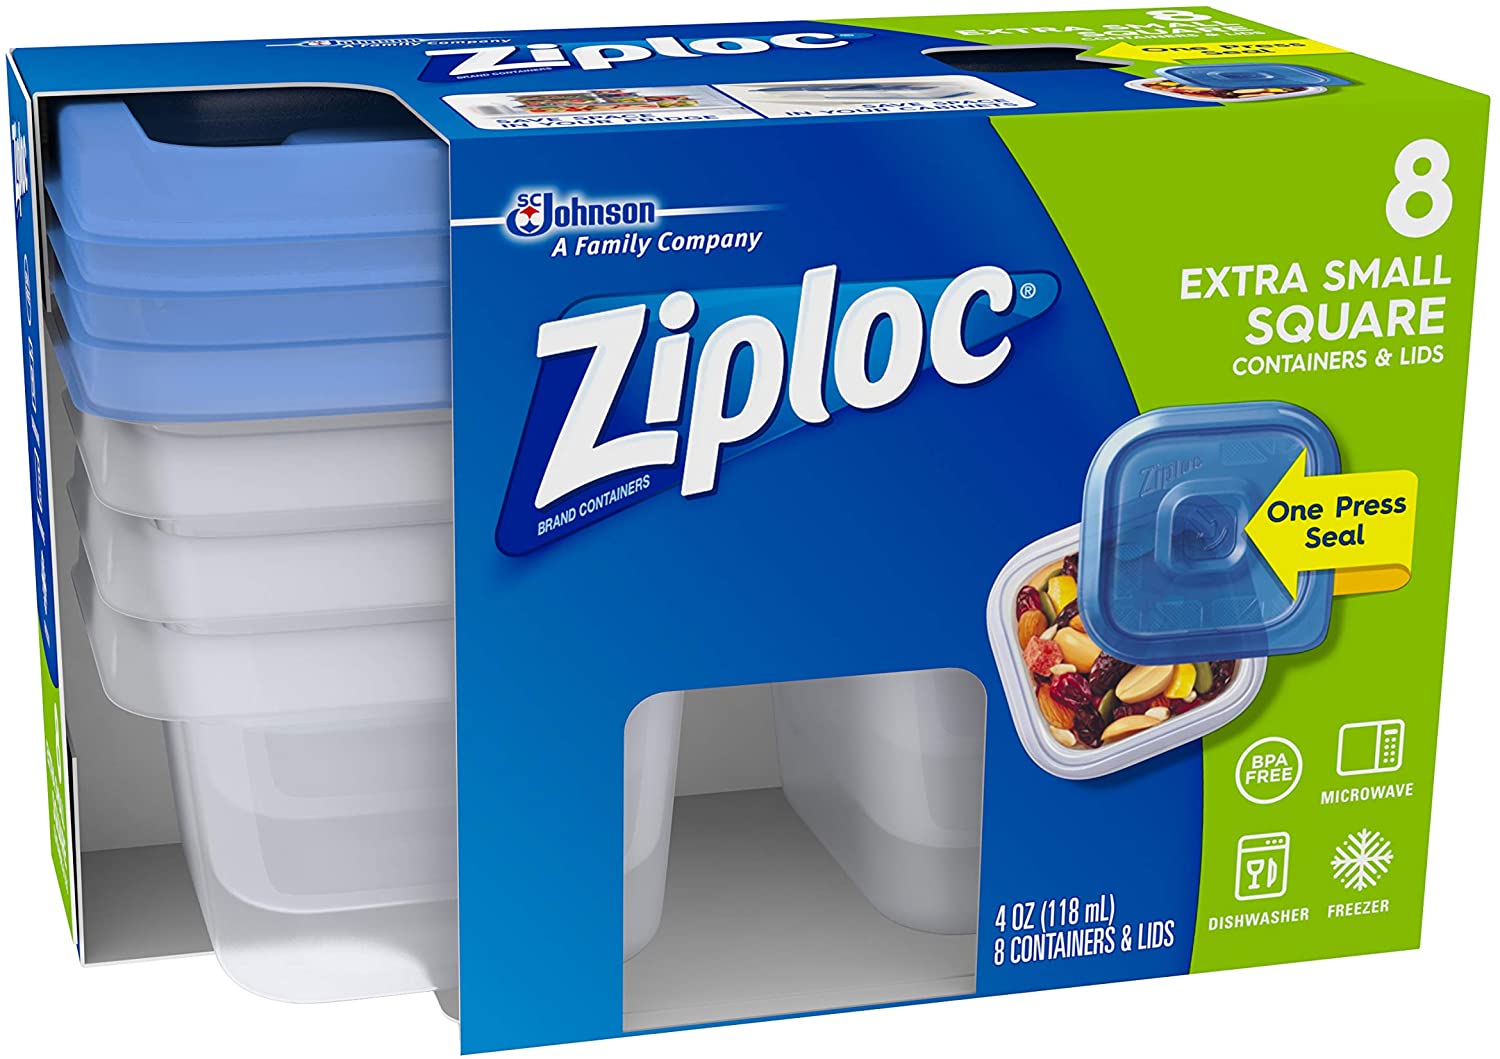  Ziploc To Go Variety Pack Containers 8ct : Health & Household